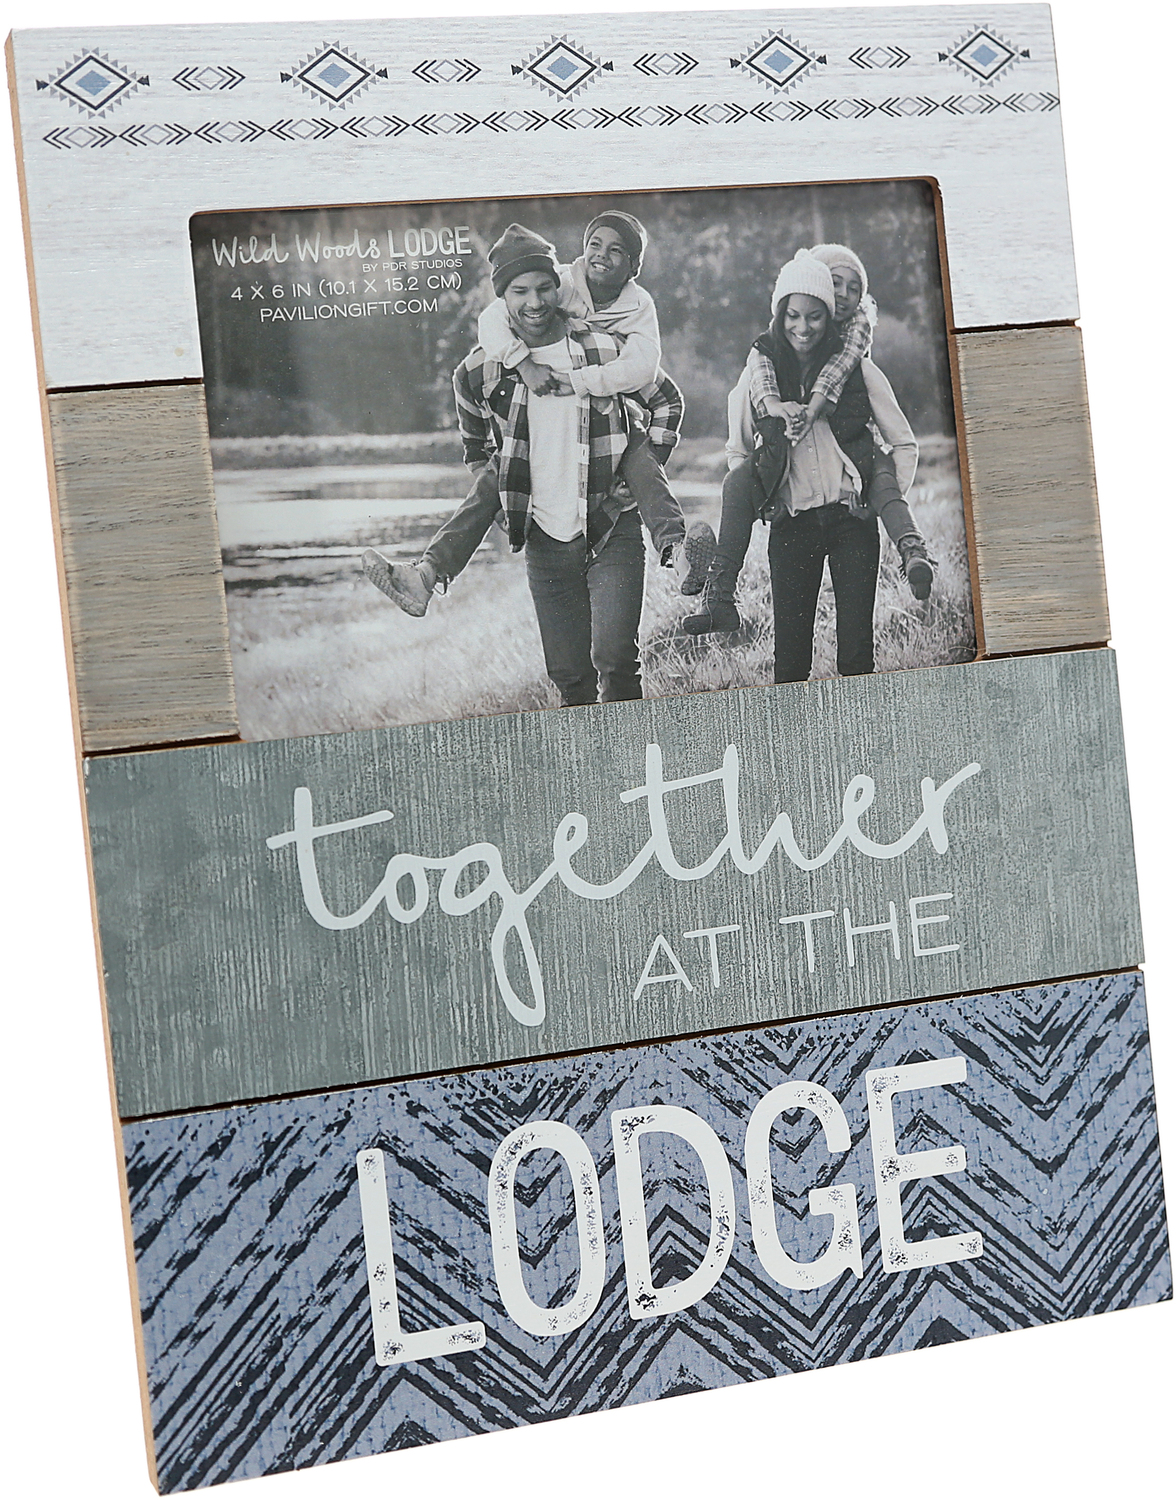 At The Lodge by Wild Woods Lodge - At The Lodge - 7.75" x 10" Frame (Holds 4" x 6" Photo)